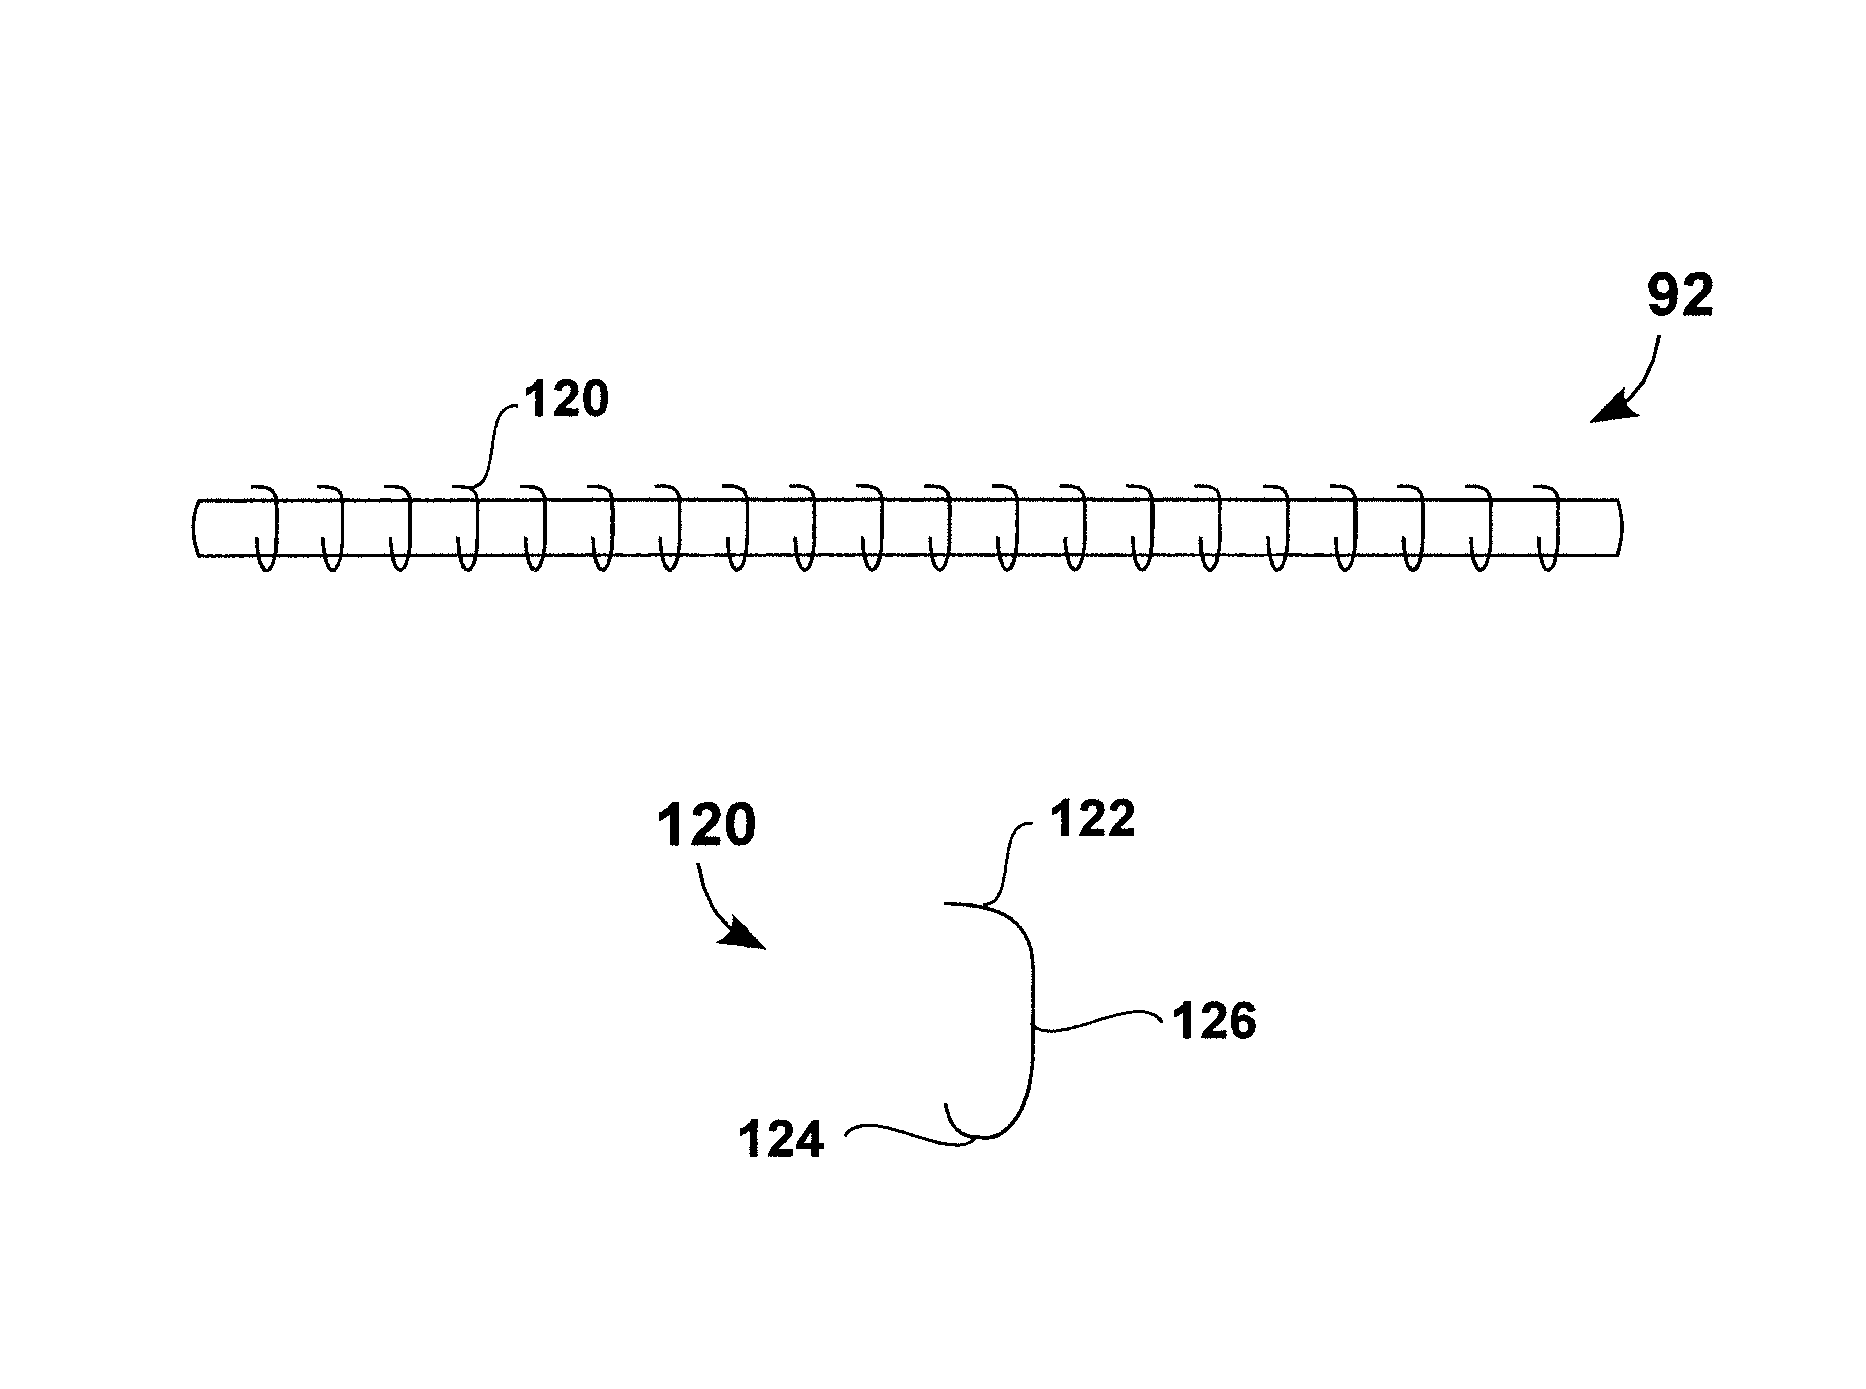 Apparatus for a low-cost semiconductor test interface system